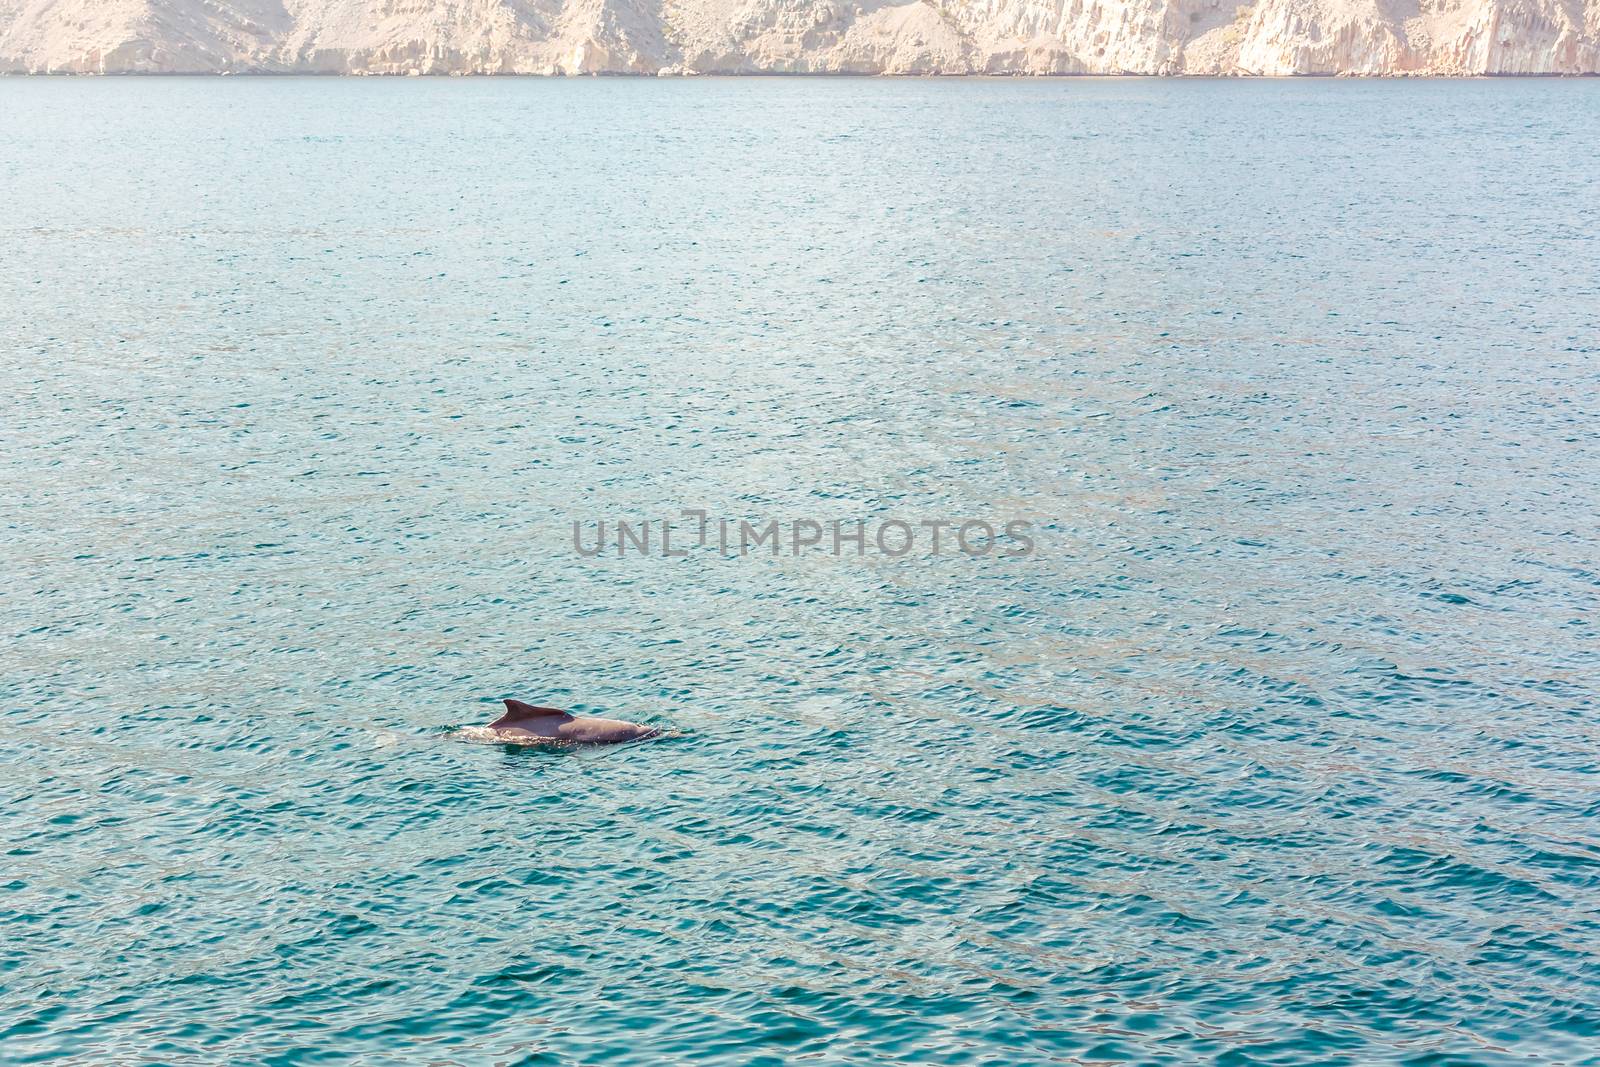 Dolphins playing in the water of the Gulf of Oman.